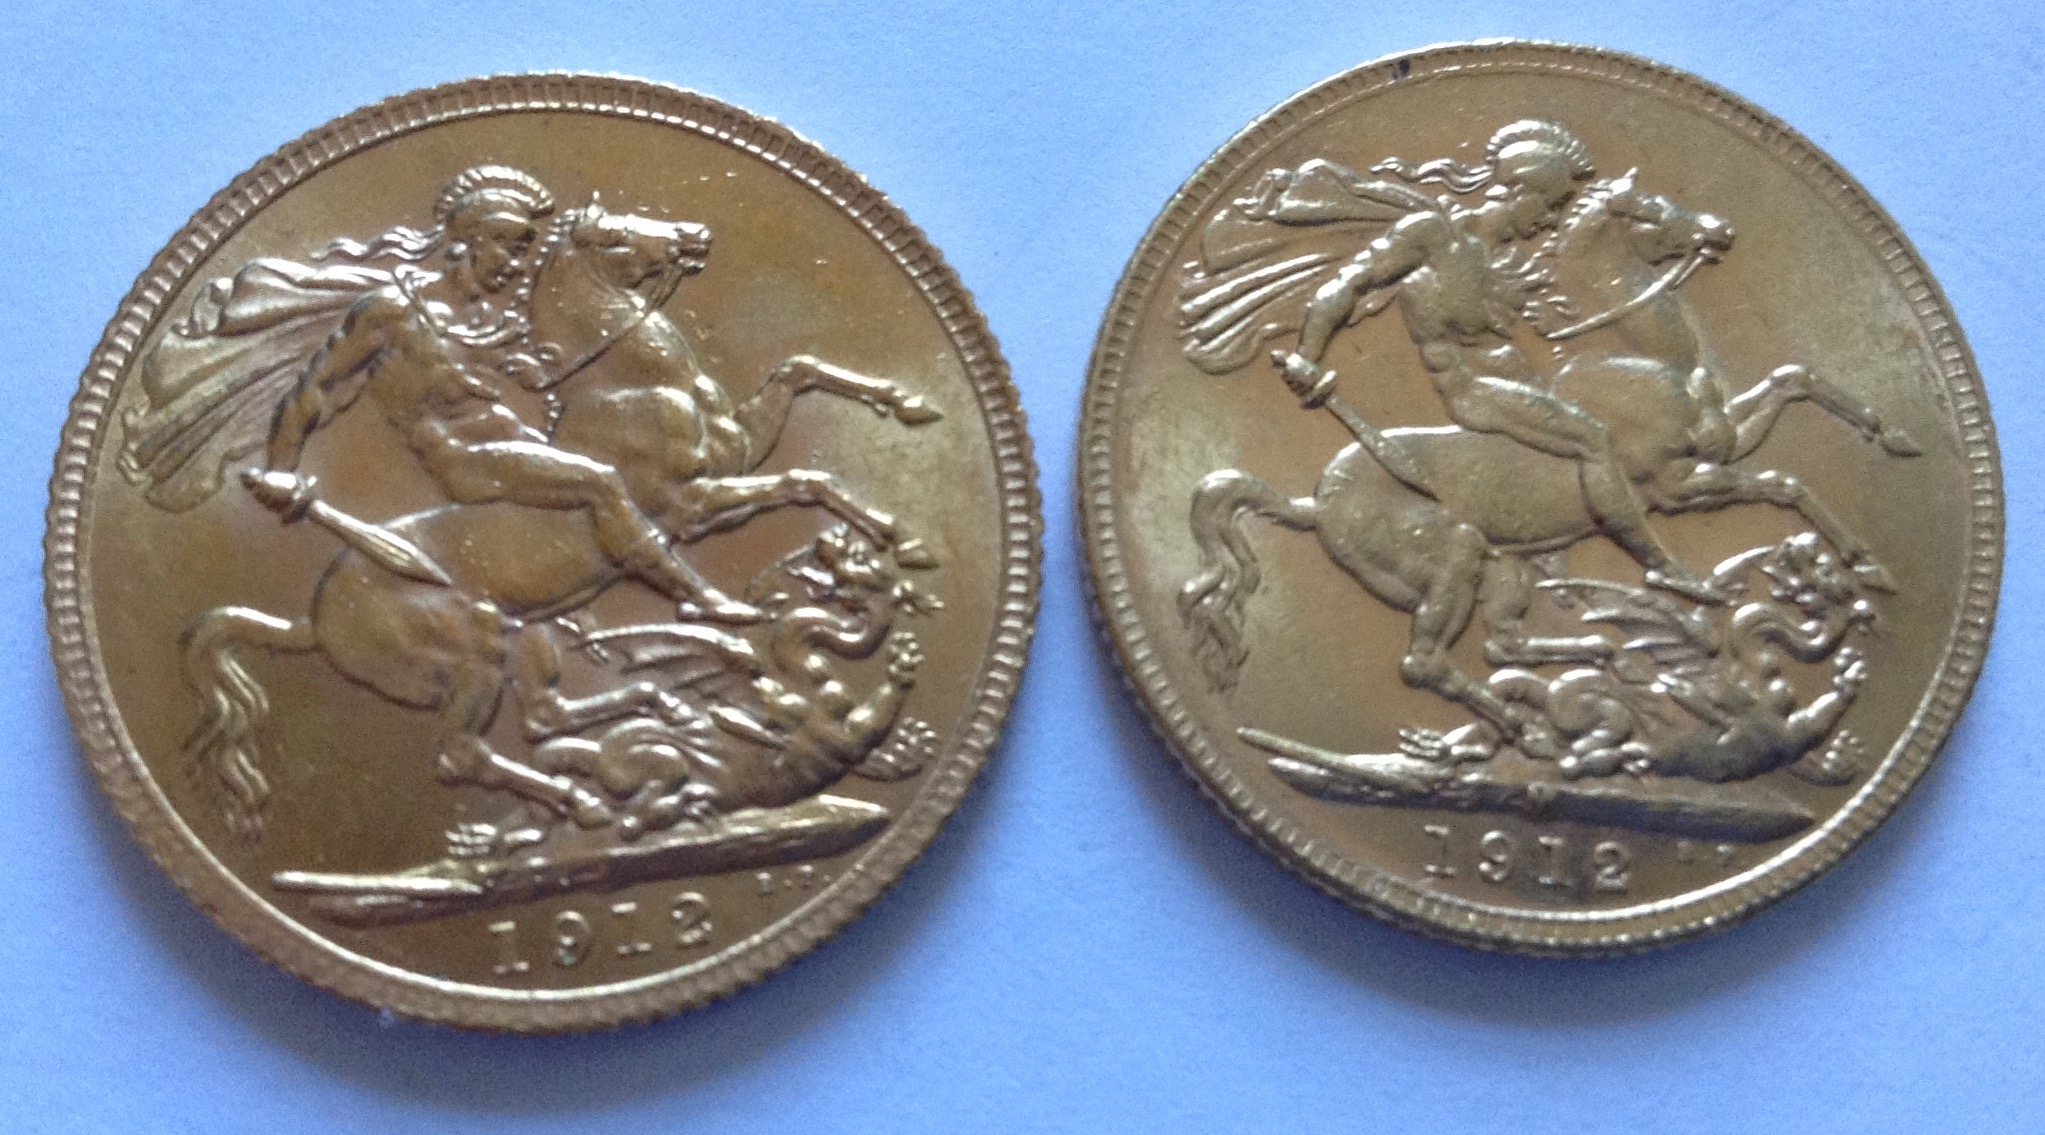 TWO EARLY 20TH CENTURY 22CT GOLD SOVEREIGN COINS Both dated 1912 and having a portrait of King - Image 2 of 2